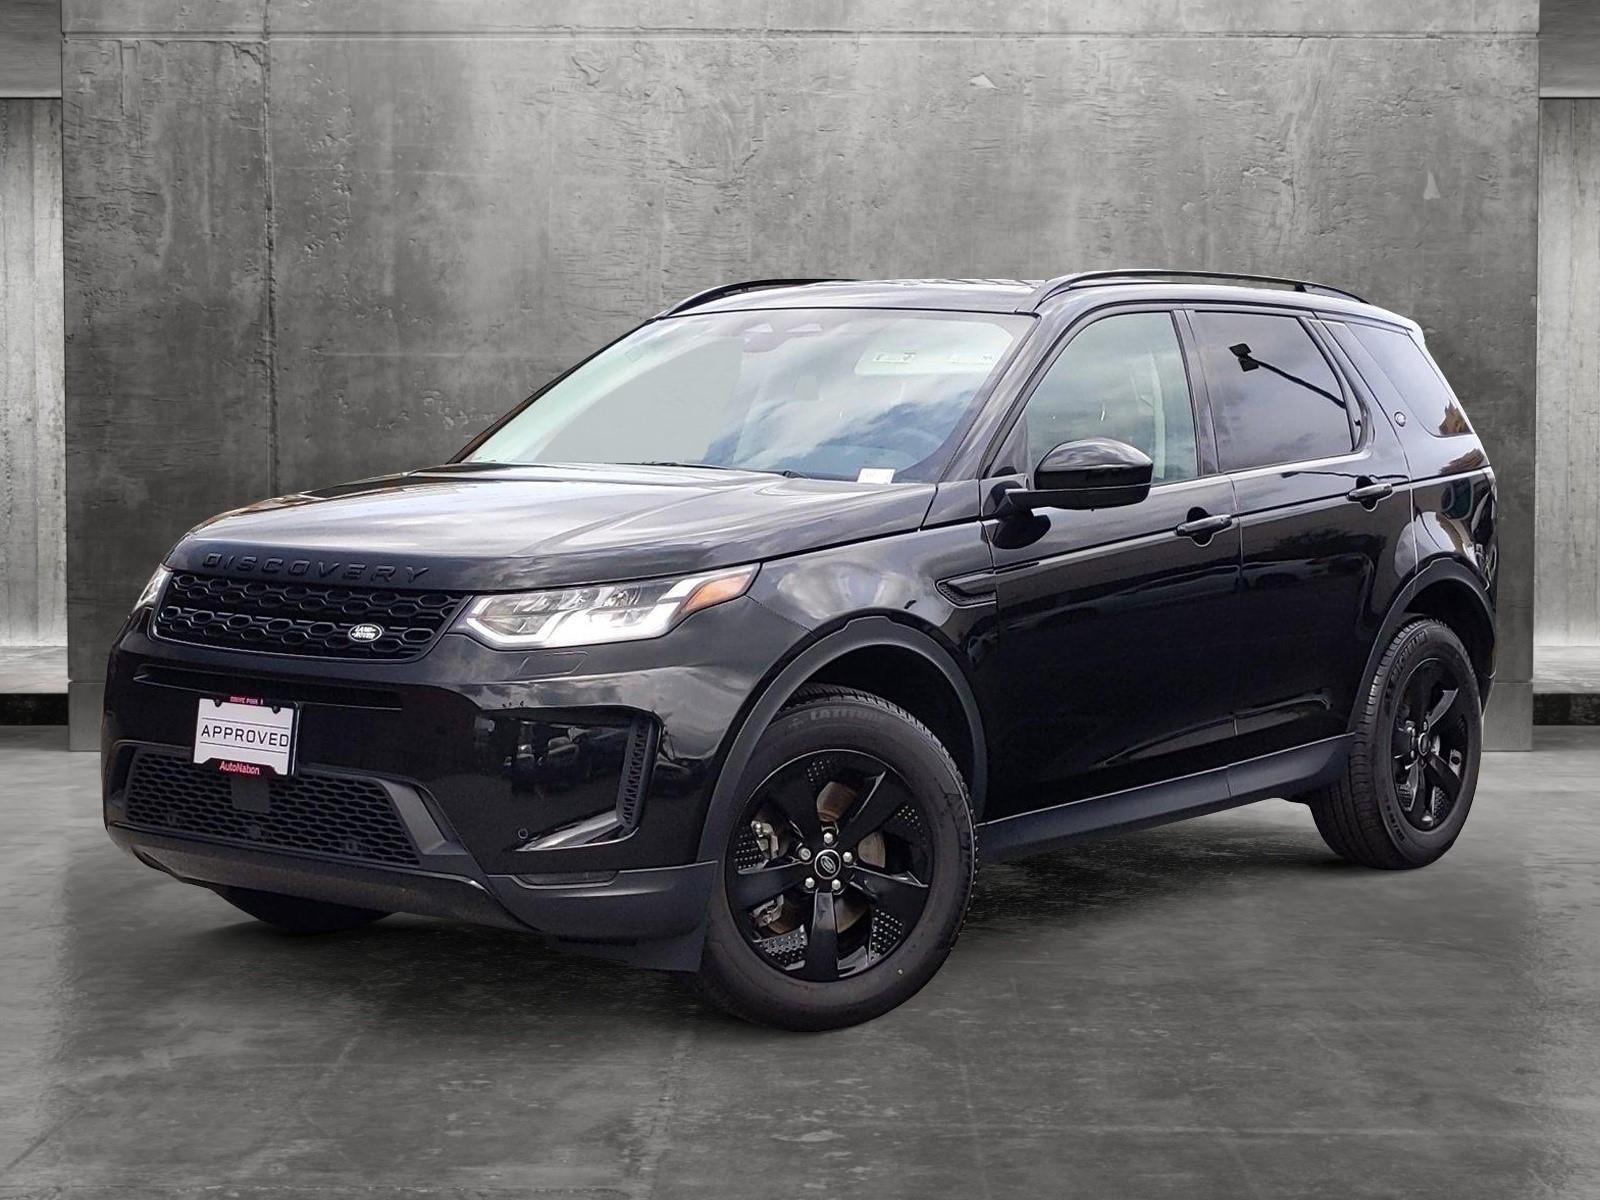 Used Black Land Rover Discovery Sport for Sale